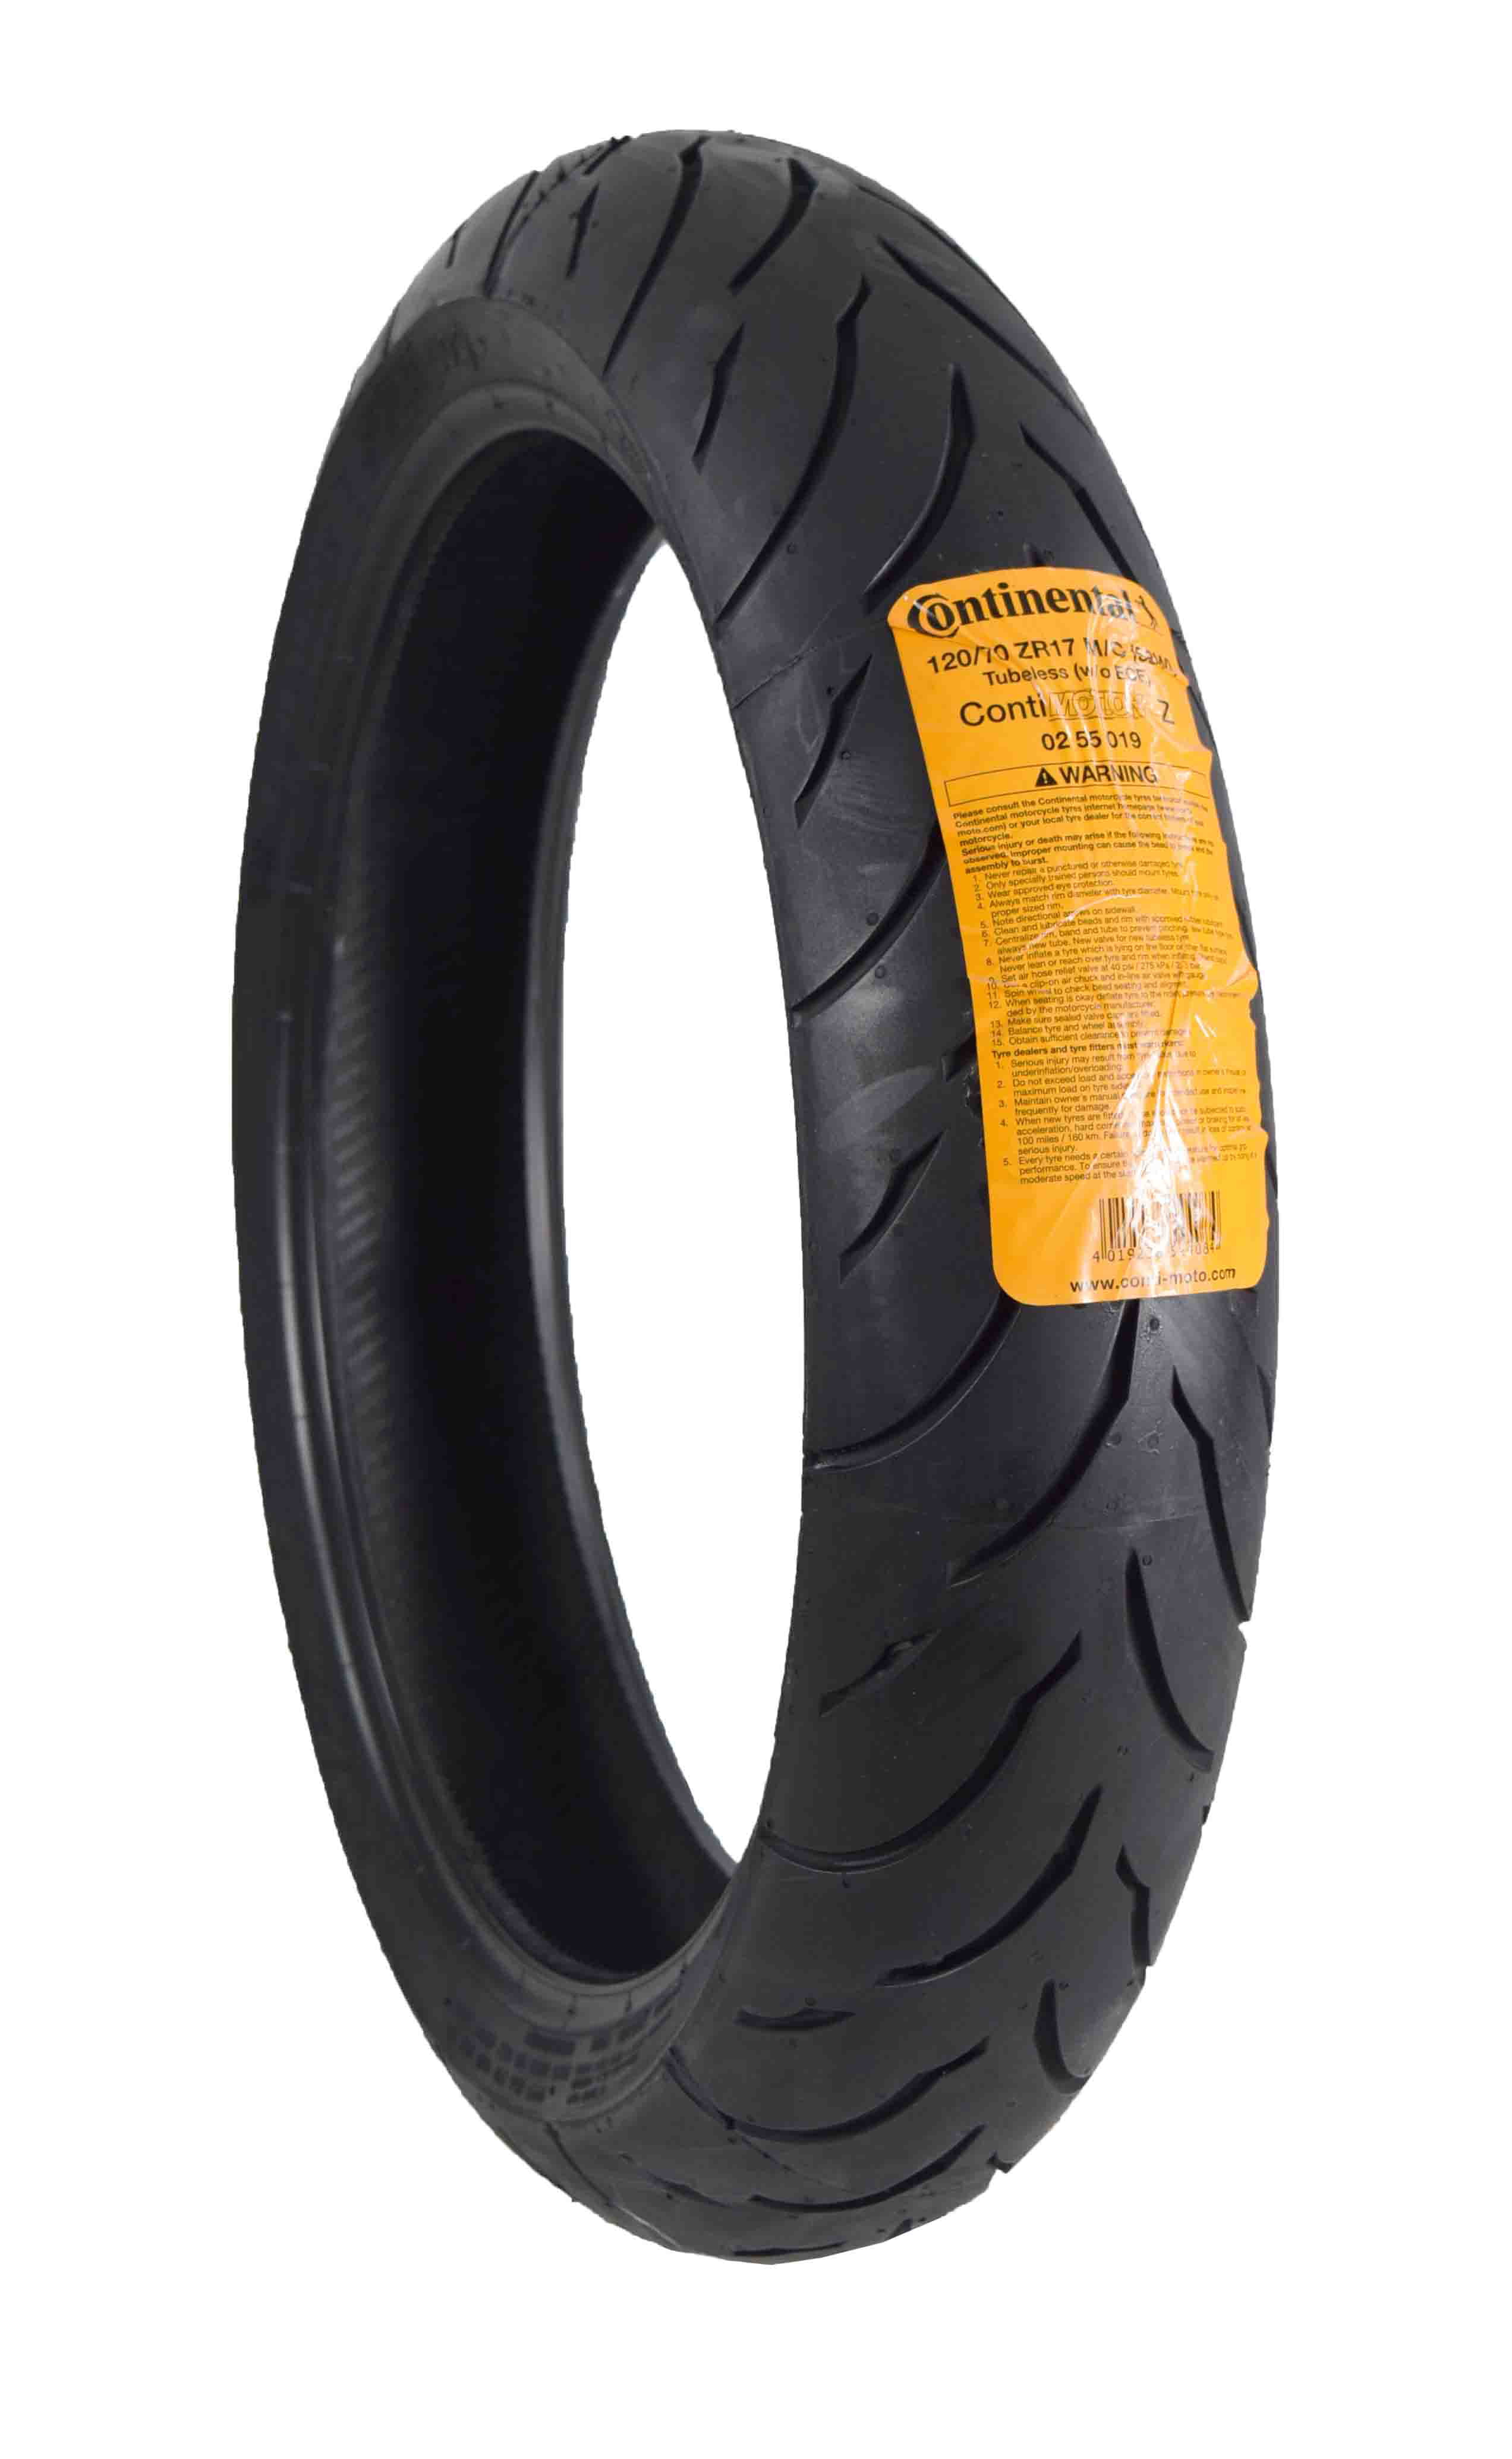 1x Continental CONTIMOTION Z 120/70 R17 vorne ID286 front 58W 